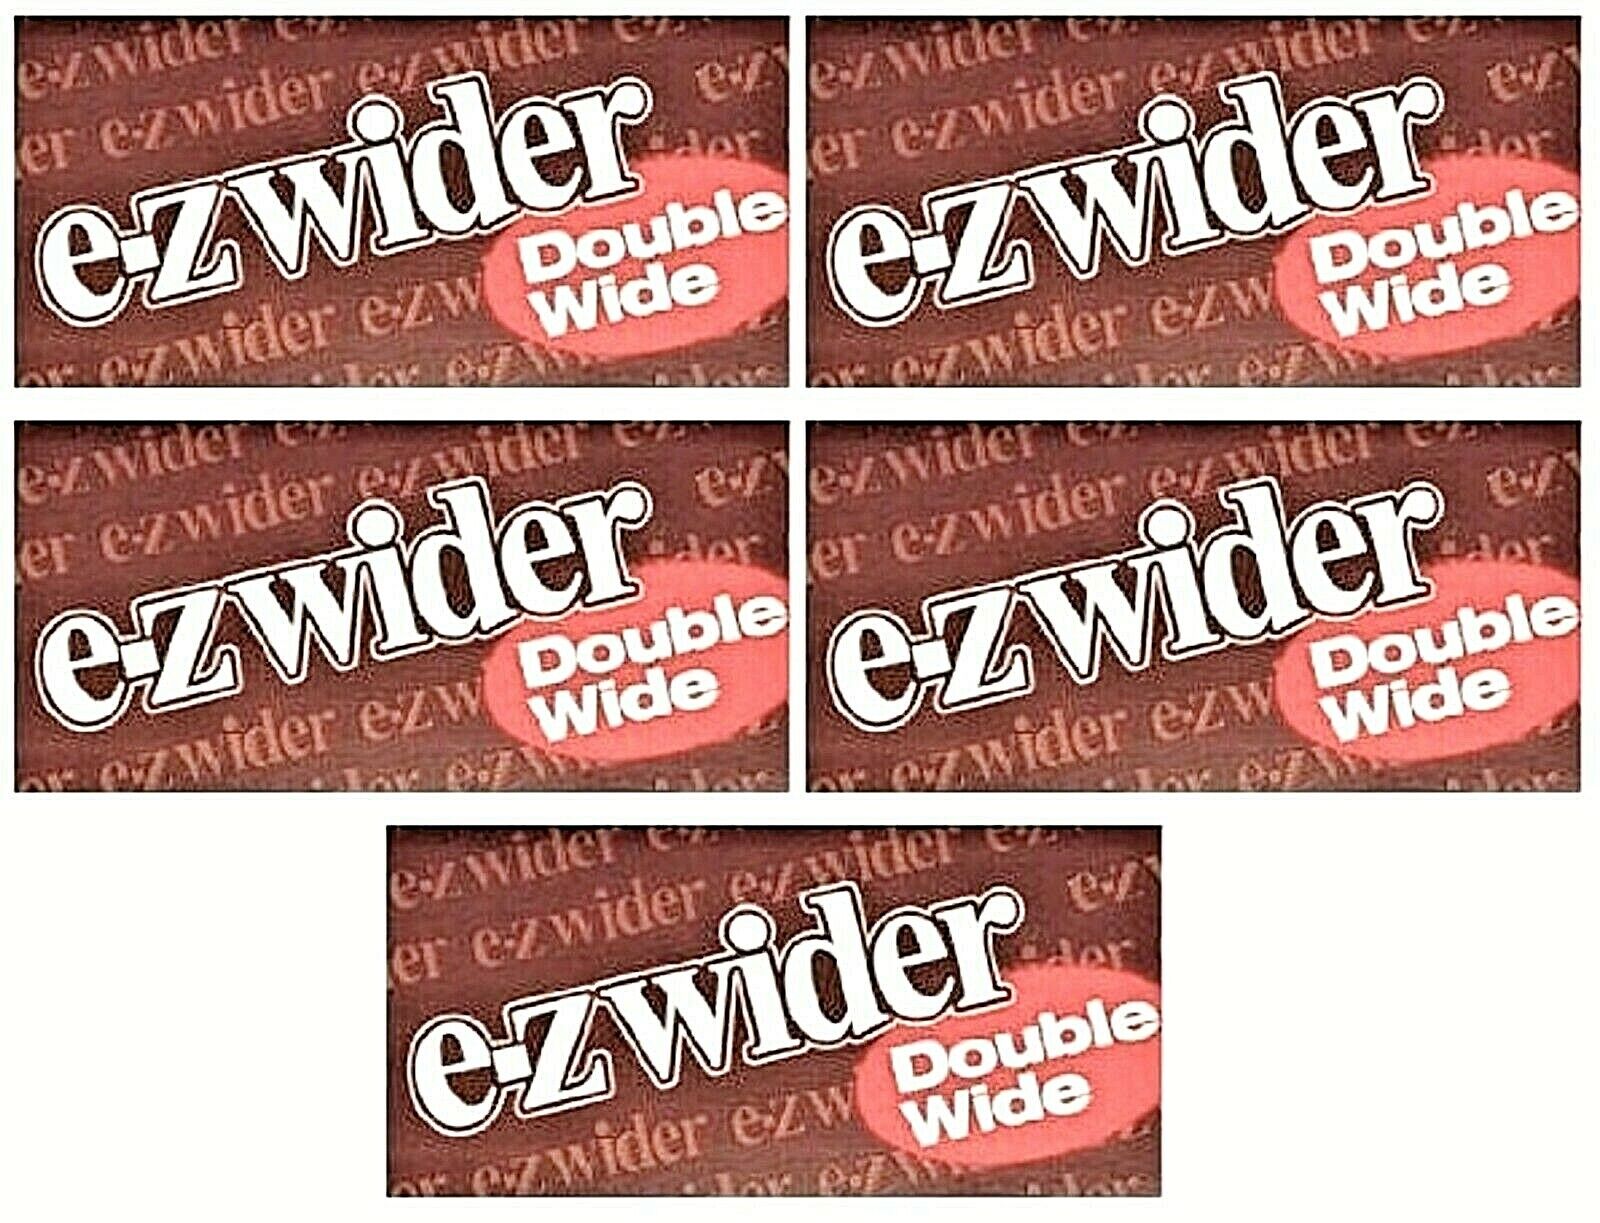 5x EZ Wider Rolling Papers Double Wide *GENUINE* 5 Packs *FREE USA Shipping*